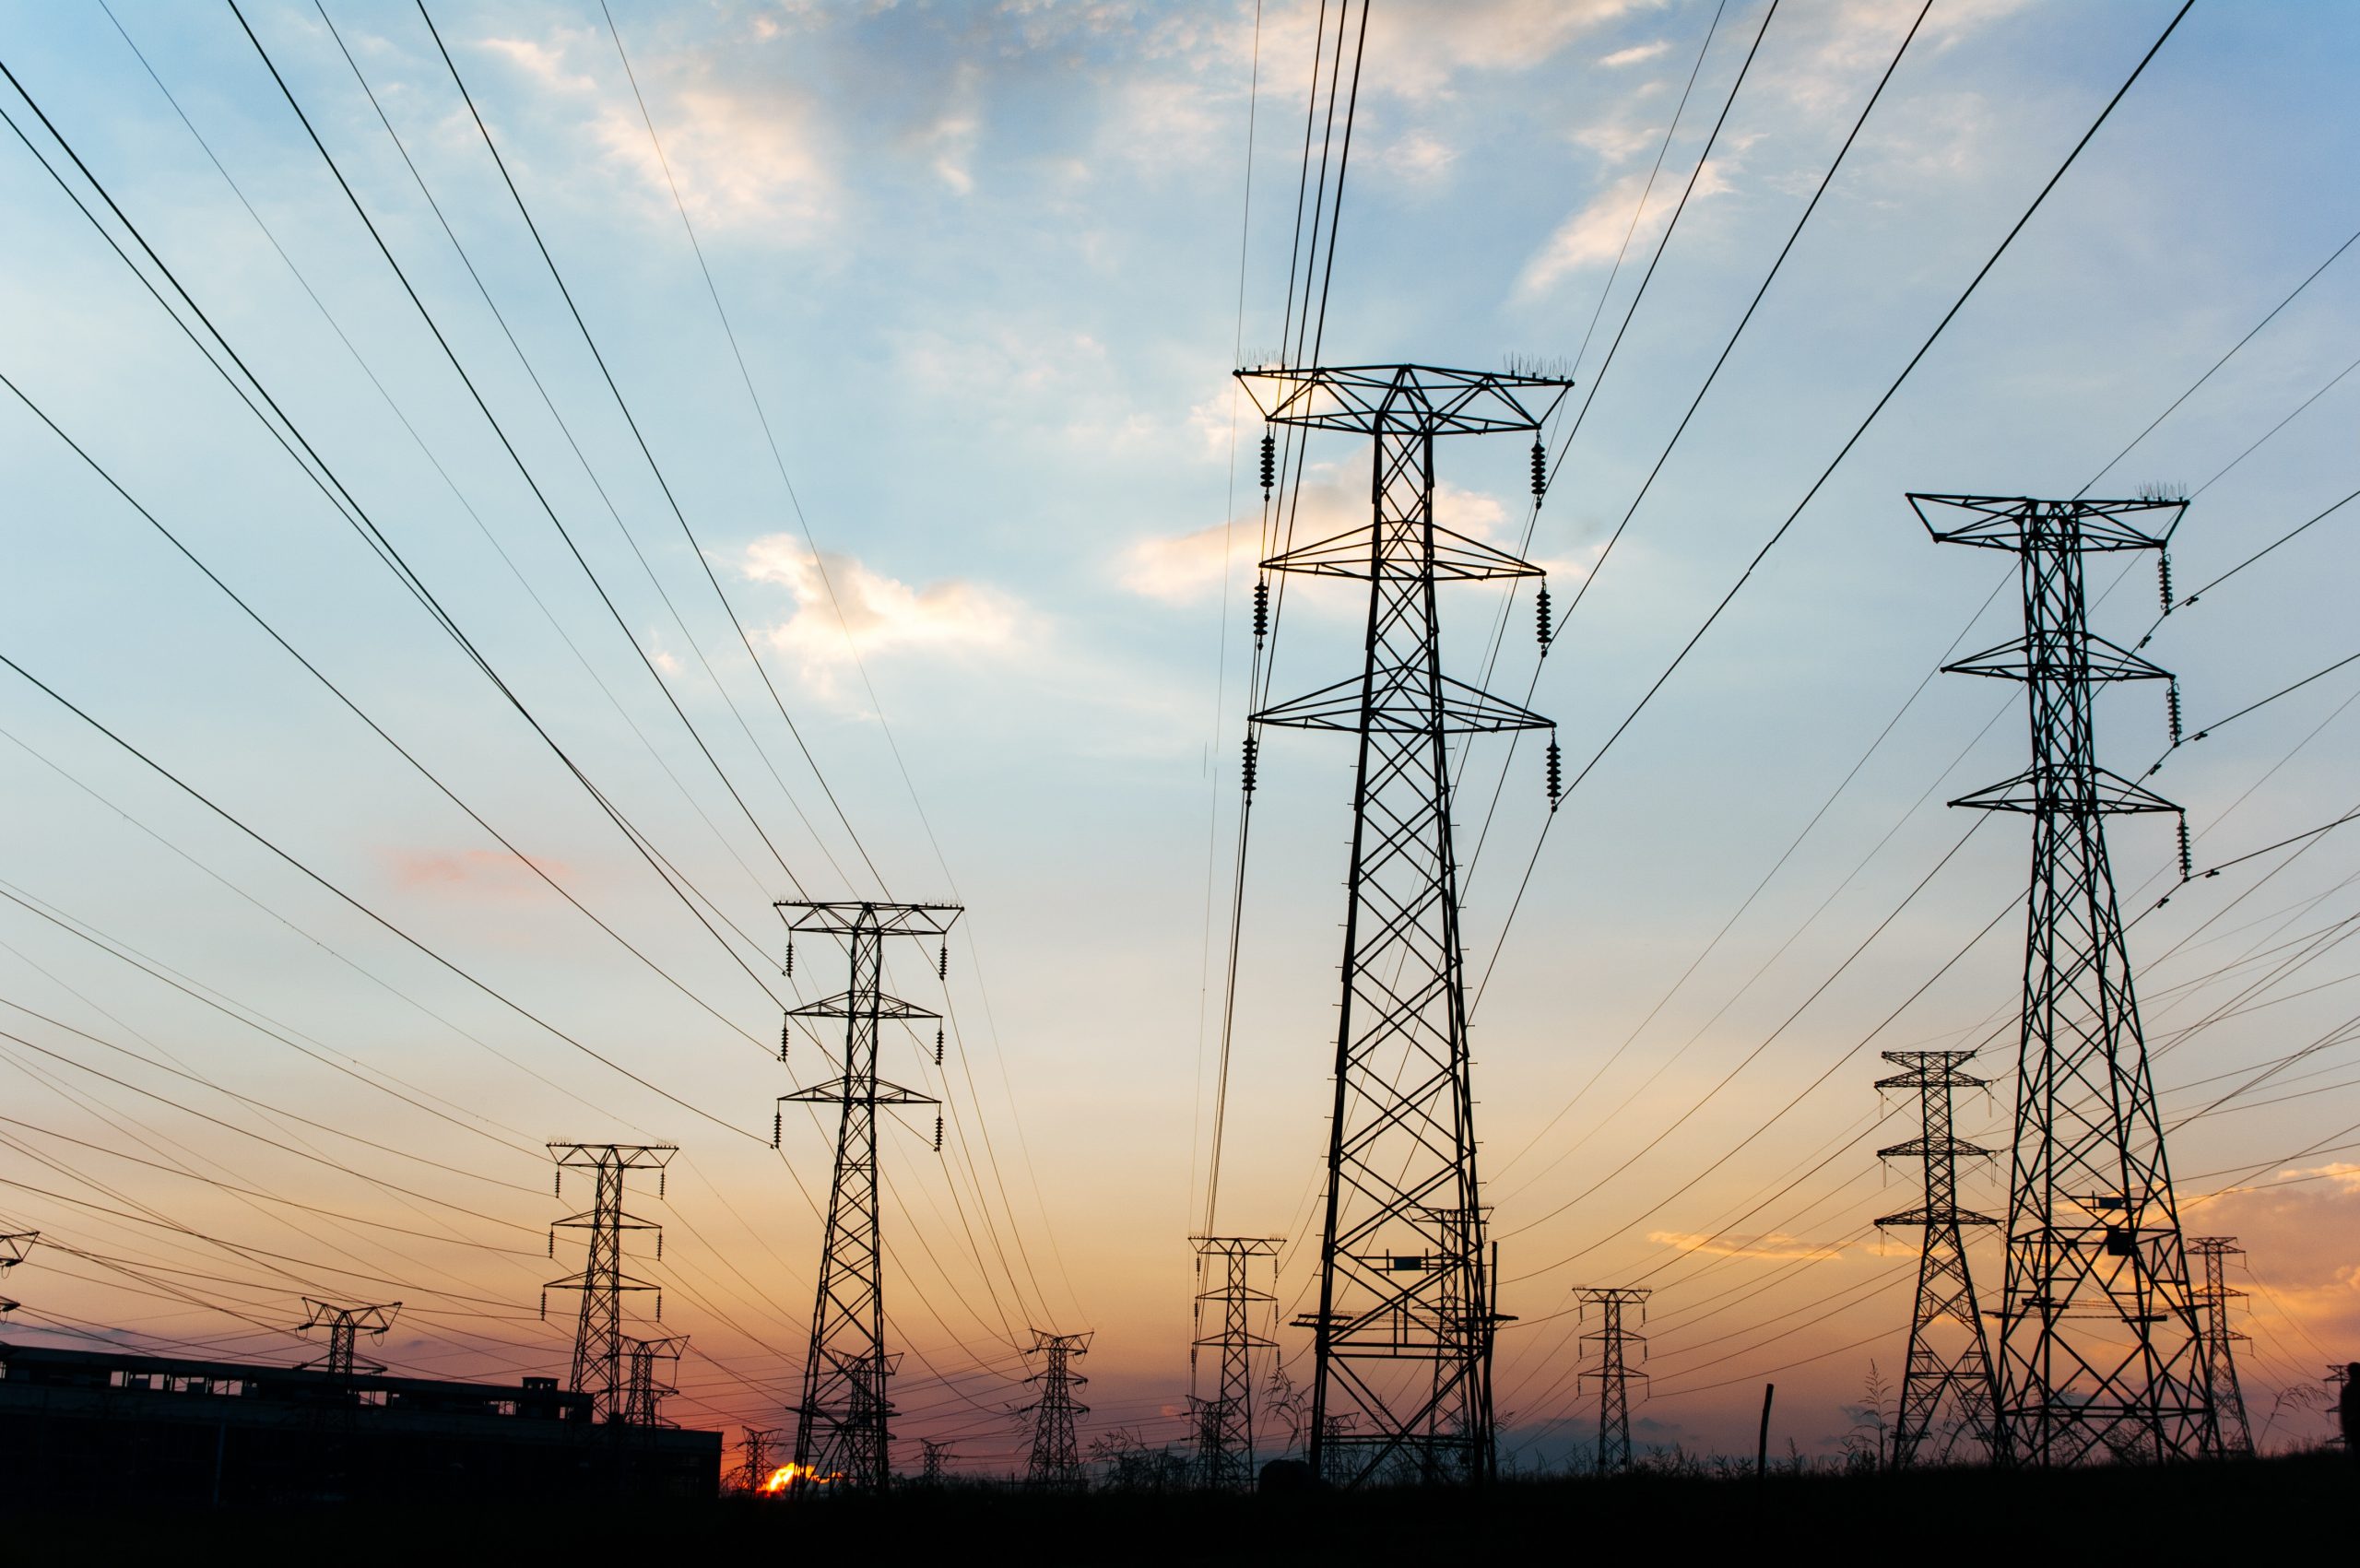 Call for Comments on the Proposed Electricity Regulations